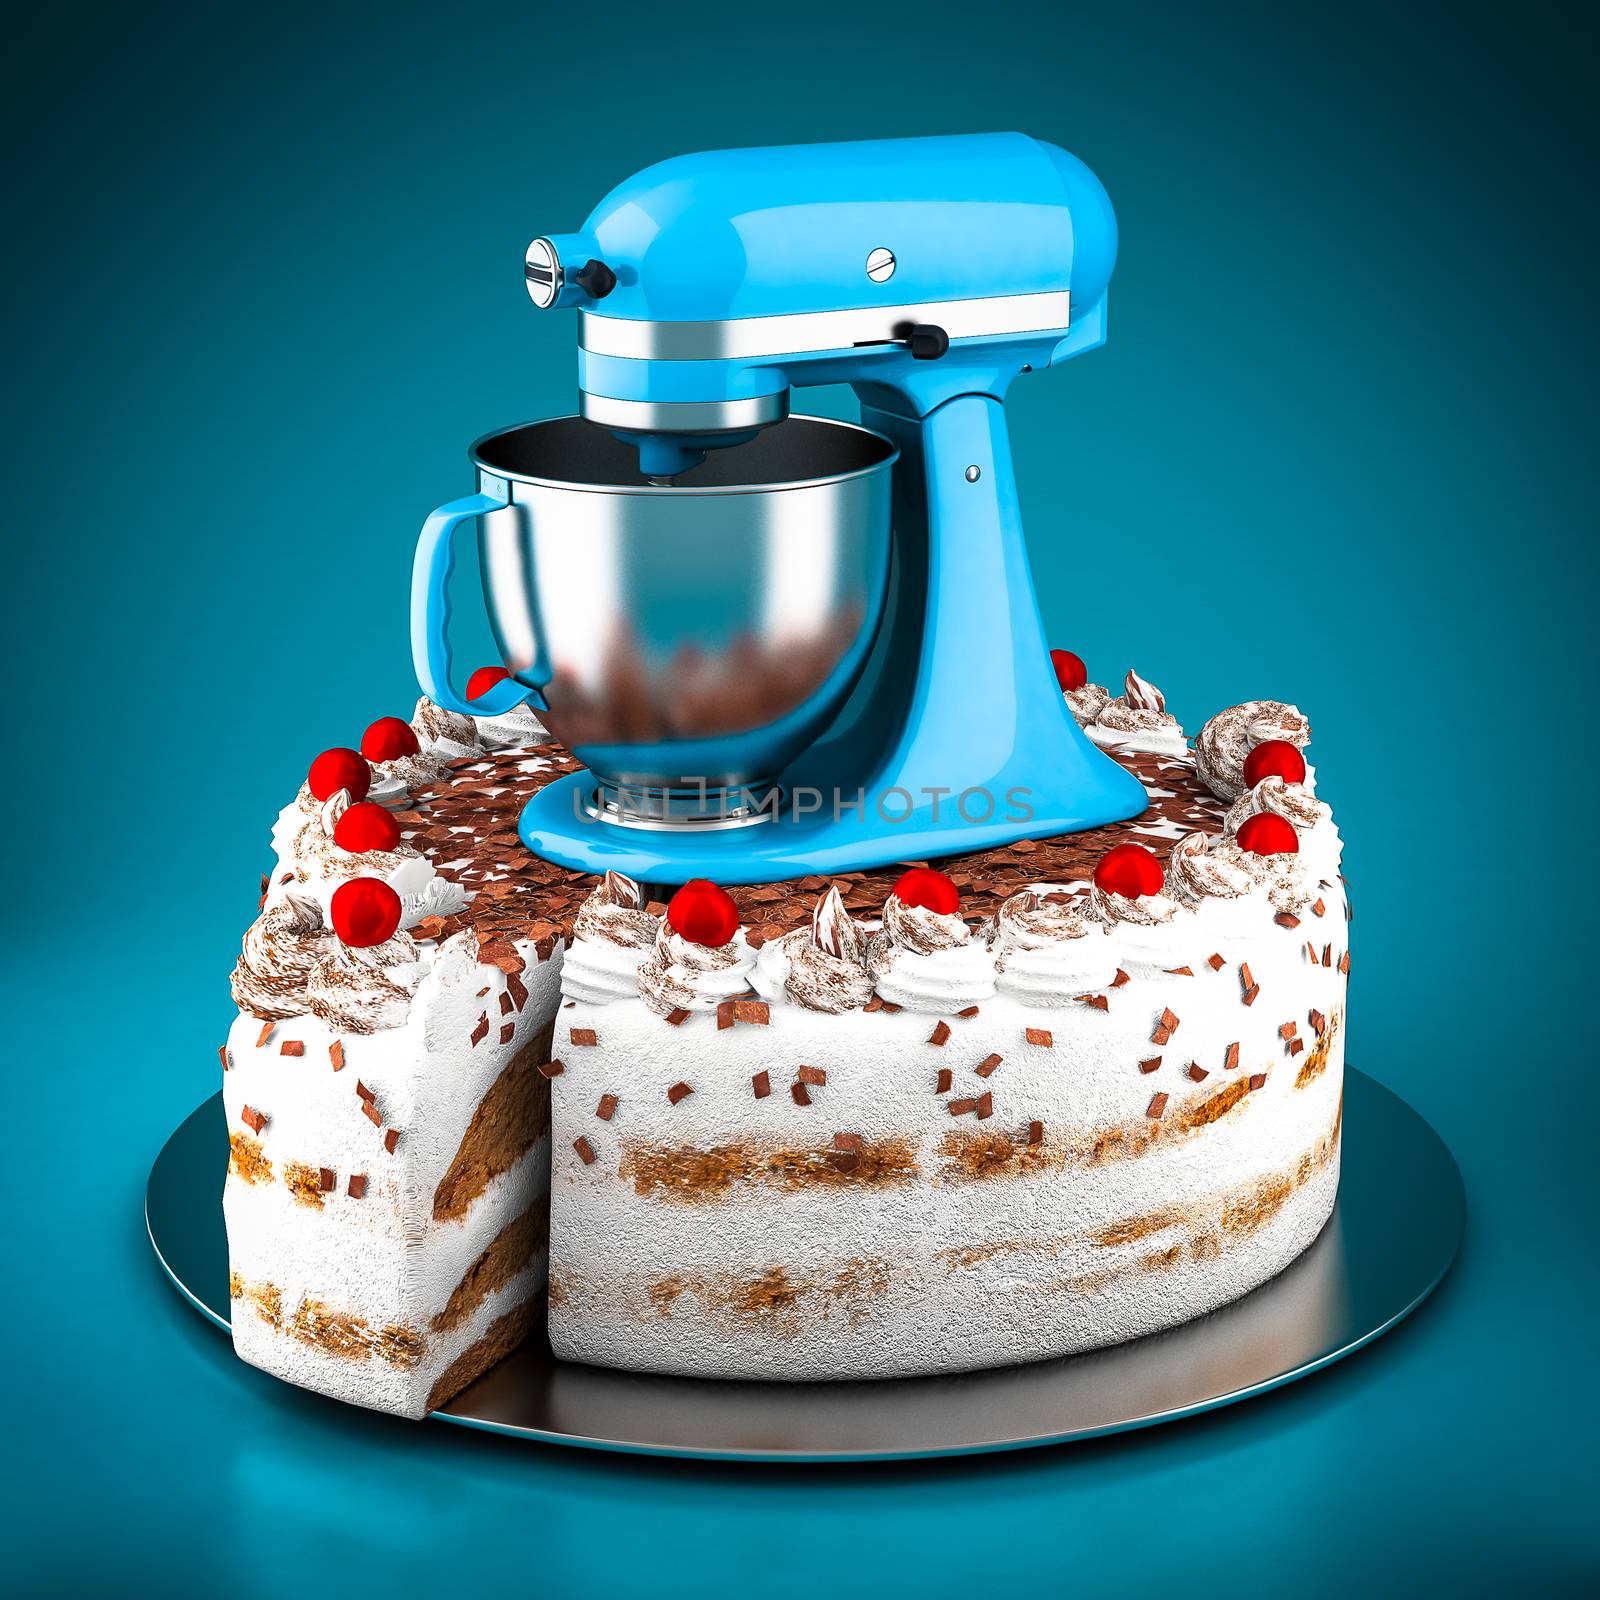 Powerful kitchen mixer on a blue background